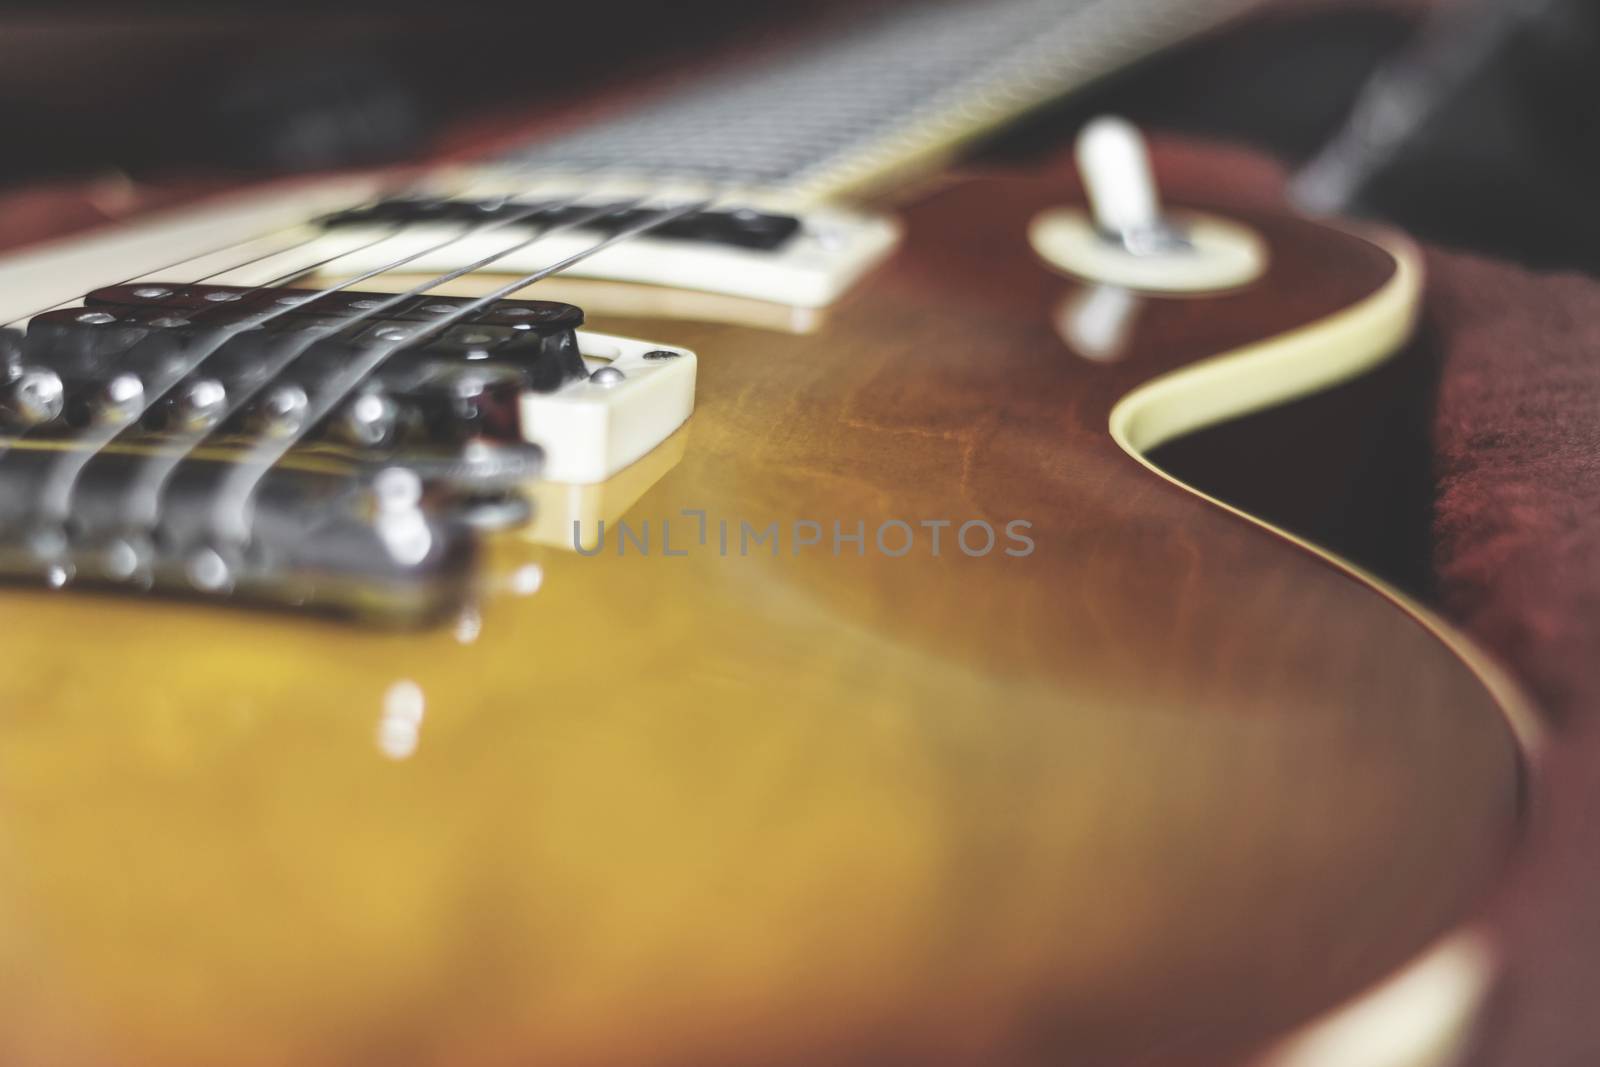 Gibson Les Paul model. Close up electric guitar vintage tone. Bergamo, ITALY - May 23, 2015.